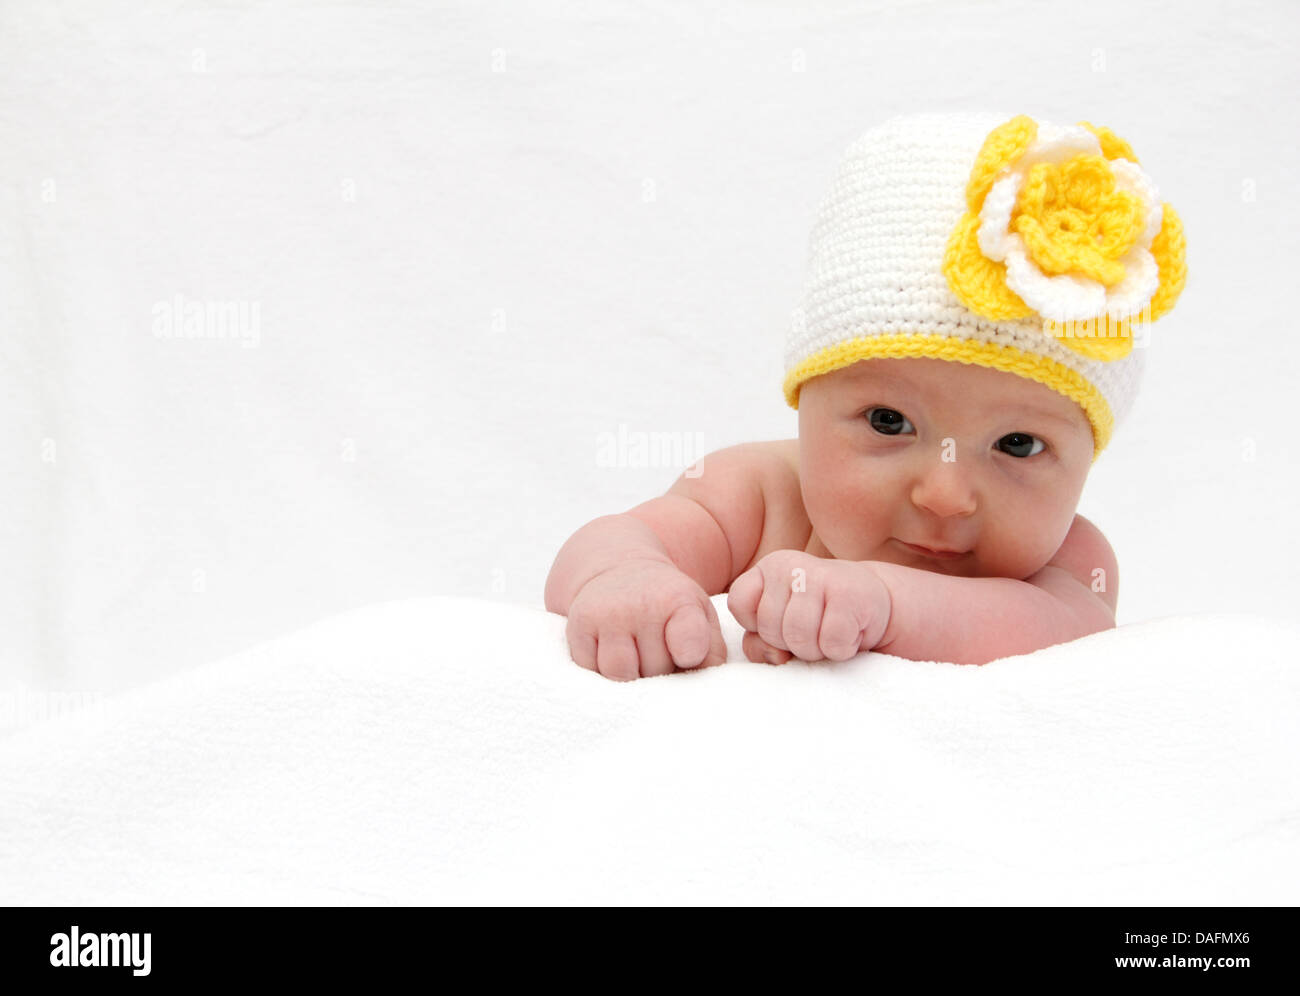 Baby with a knitted white hat baby on stomach Stock Photo